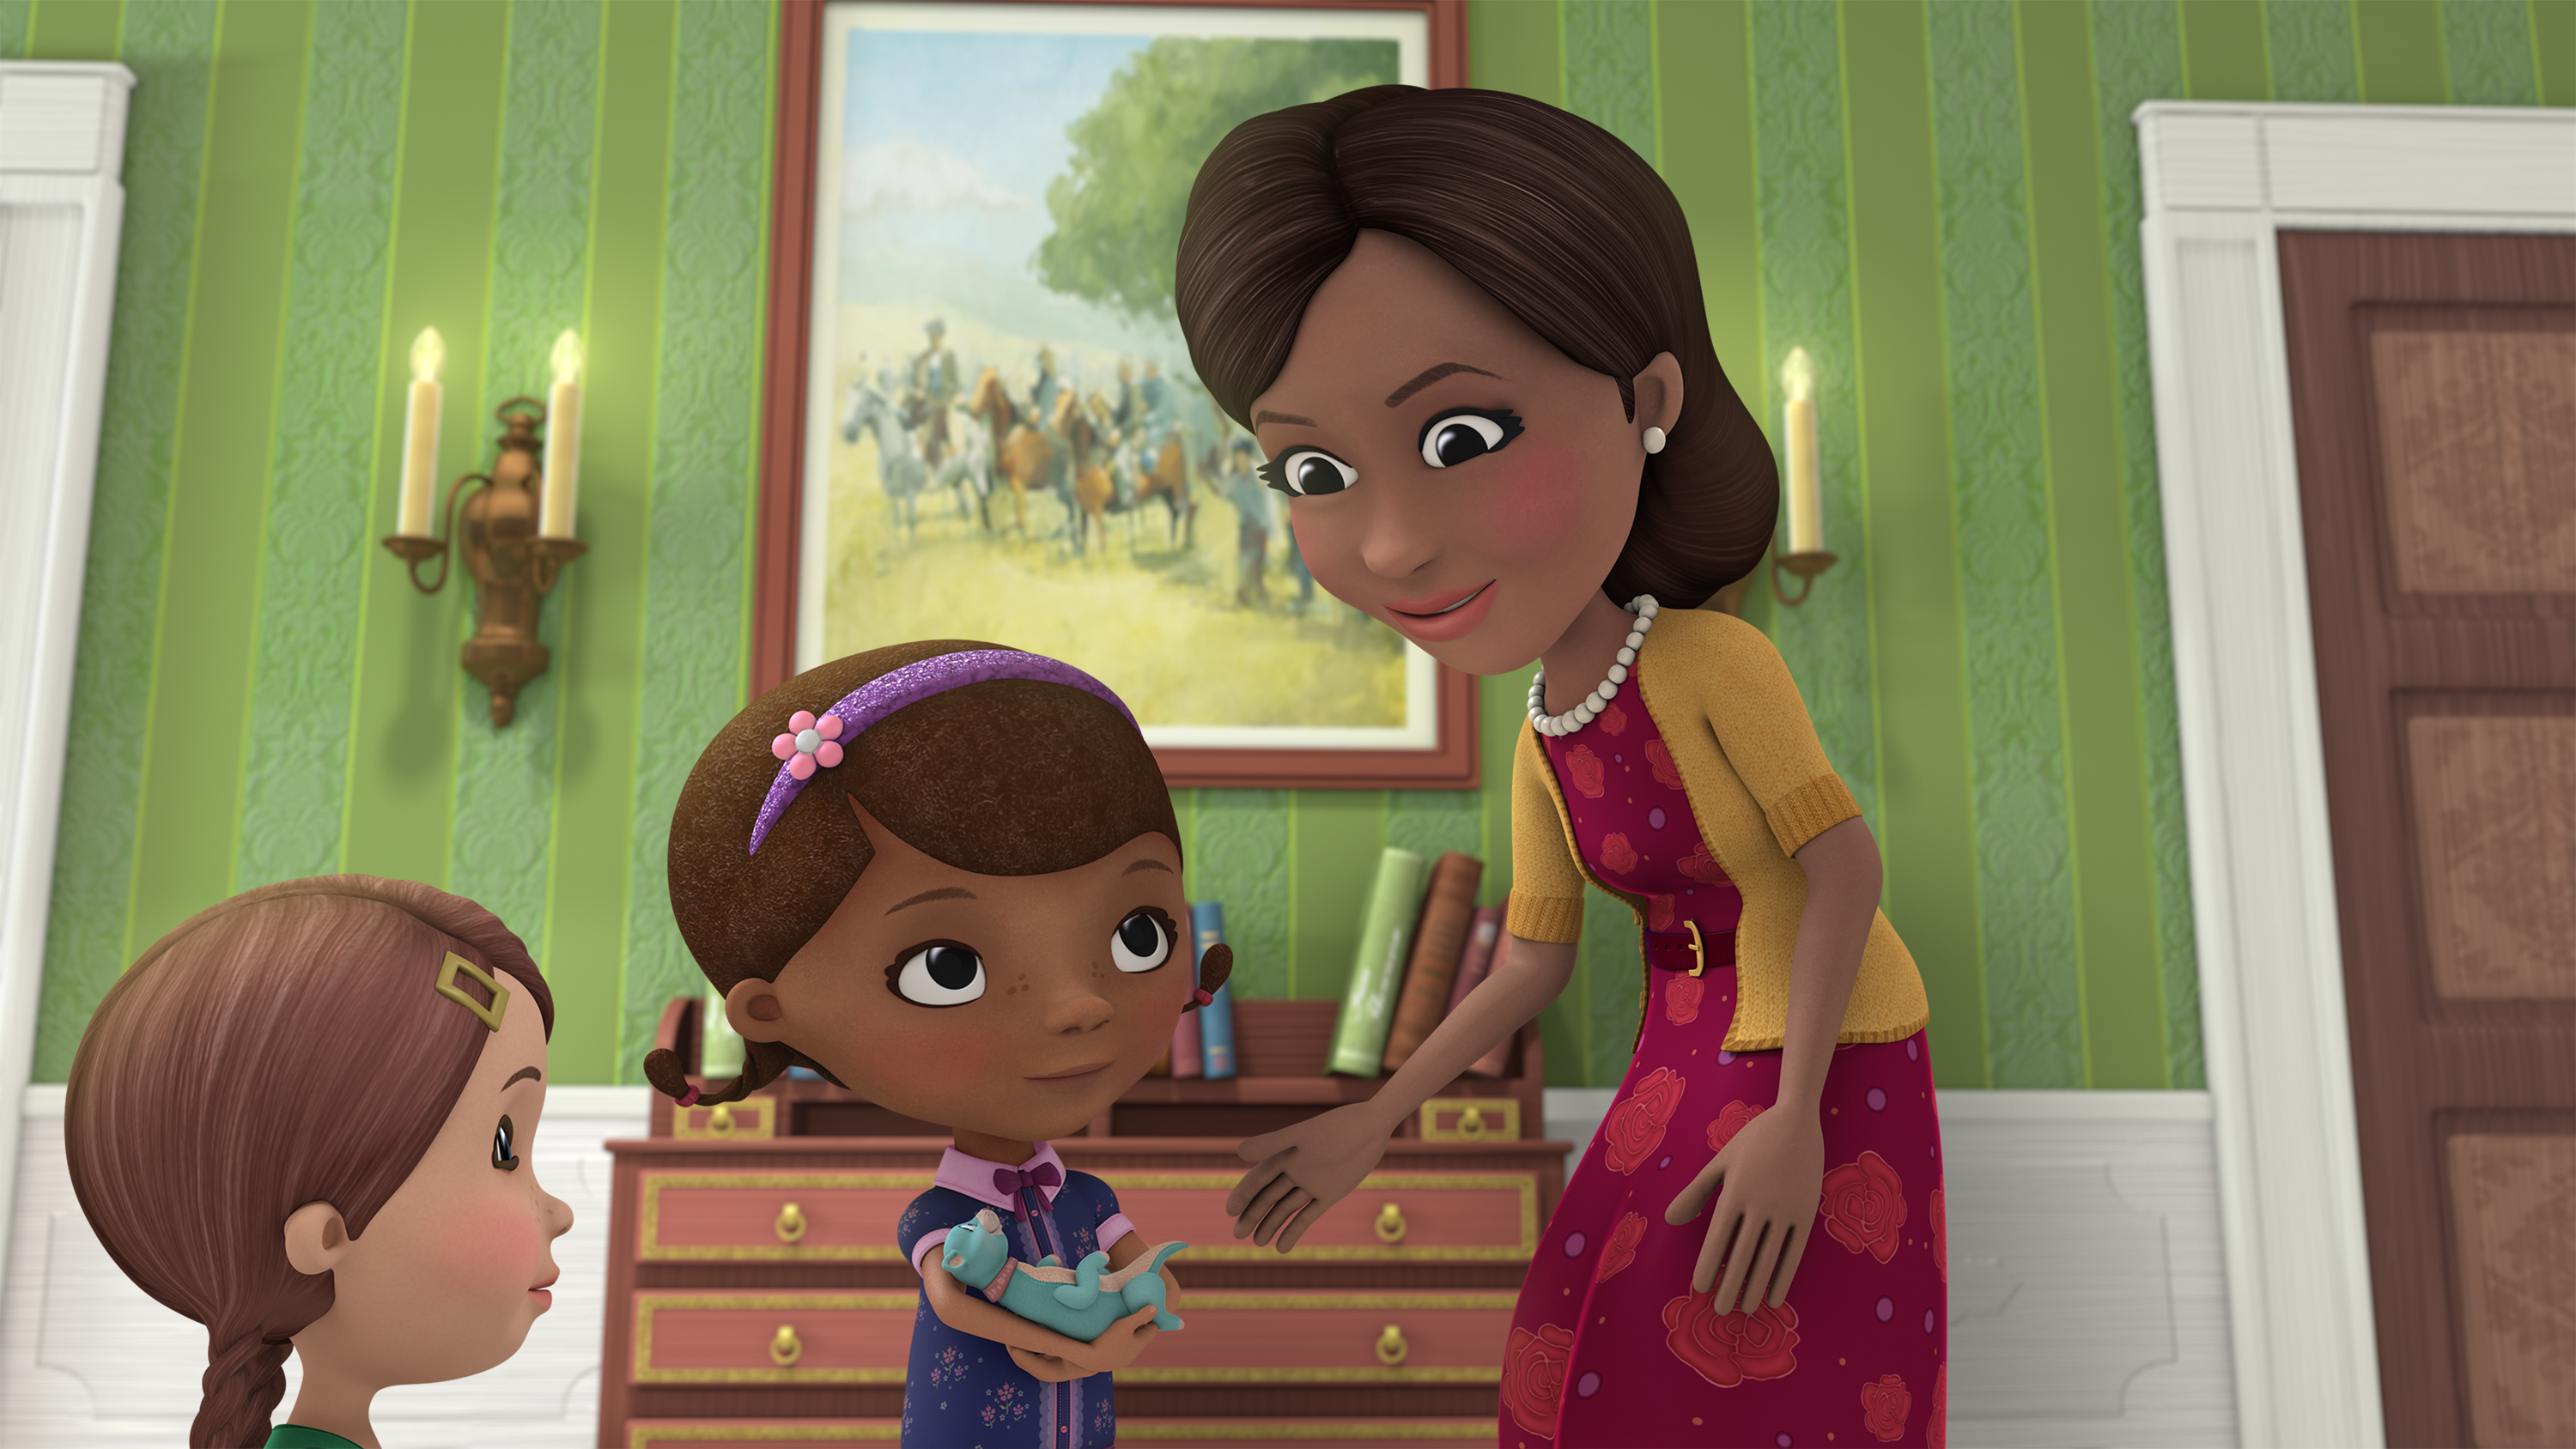 Doc and the toys travel to Washington D.C. to meet the First Lady of the United States, Michelle Obama, in a special episode of Disney Junior's acclaimed animated series "Doc McStuffins,". (Disney/Getty Images)